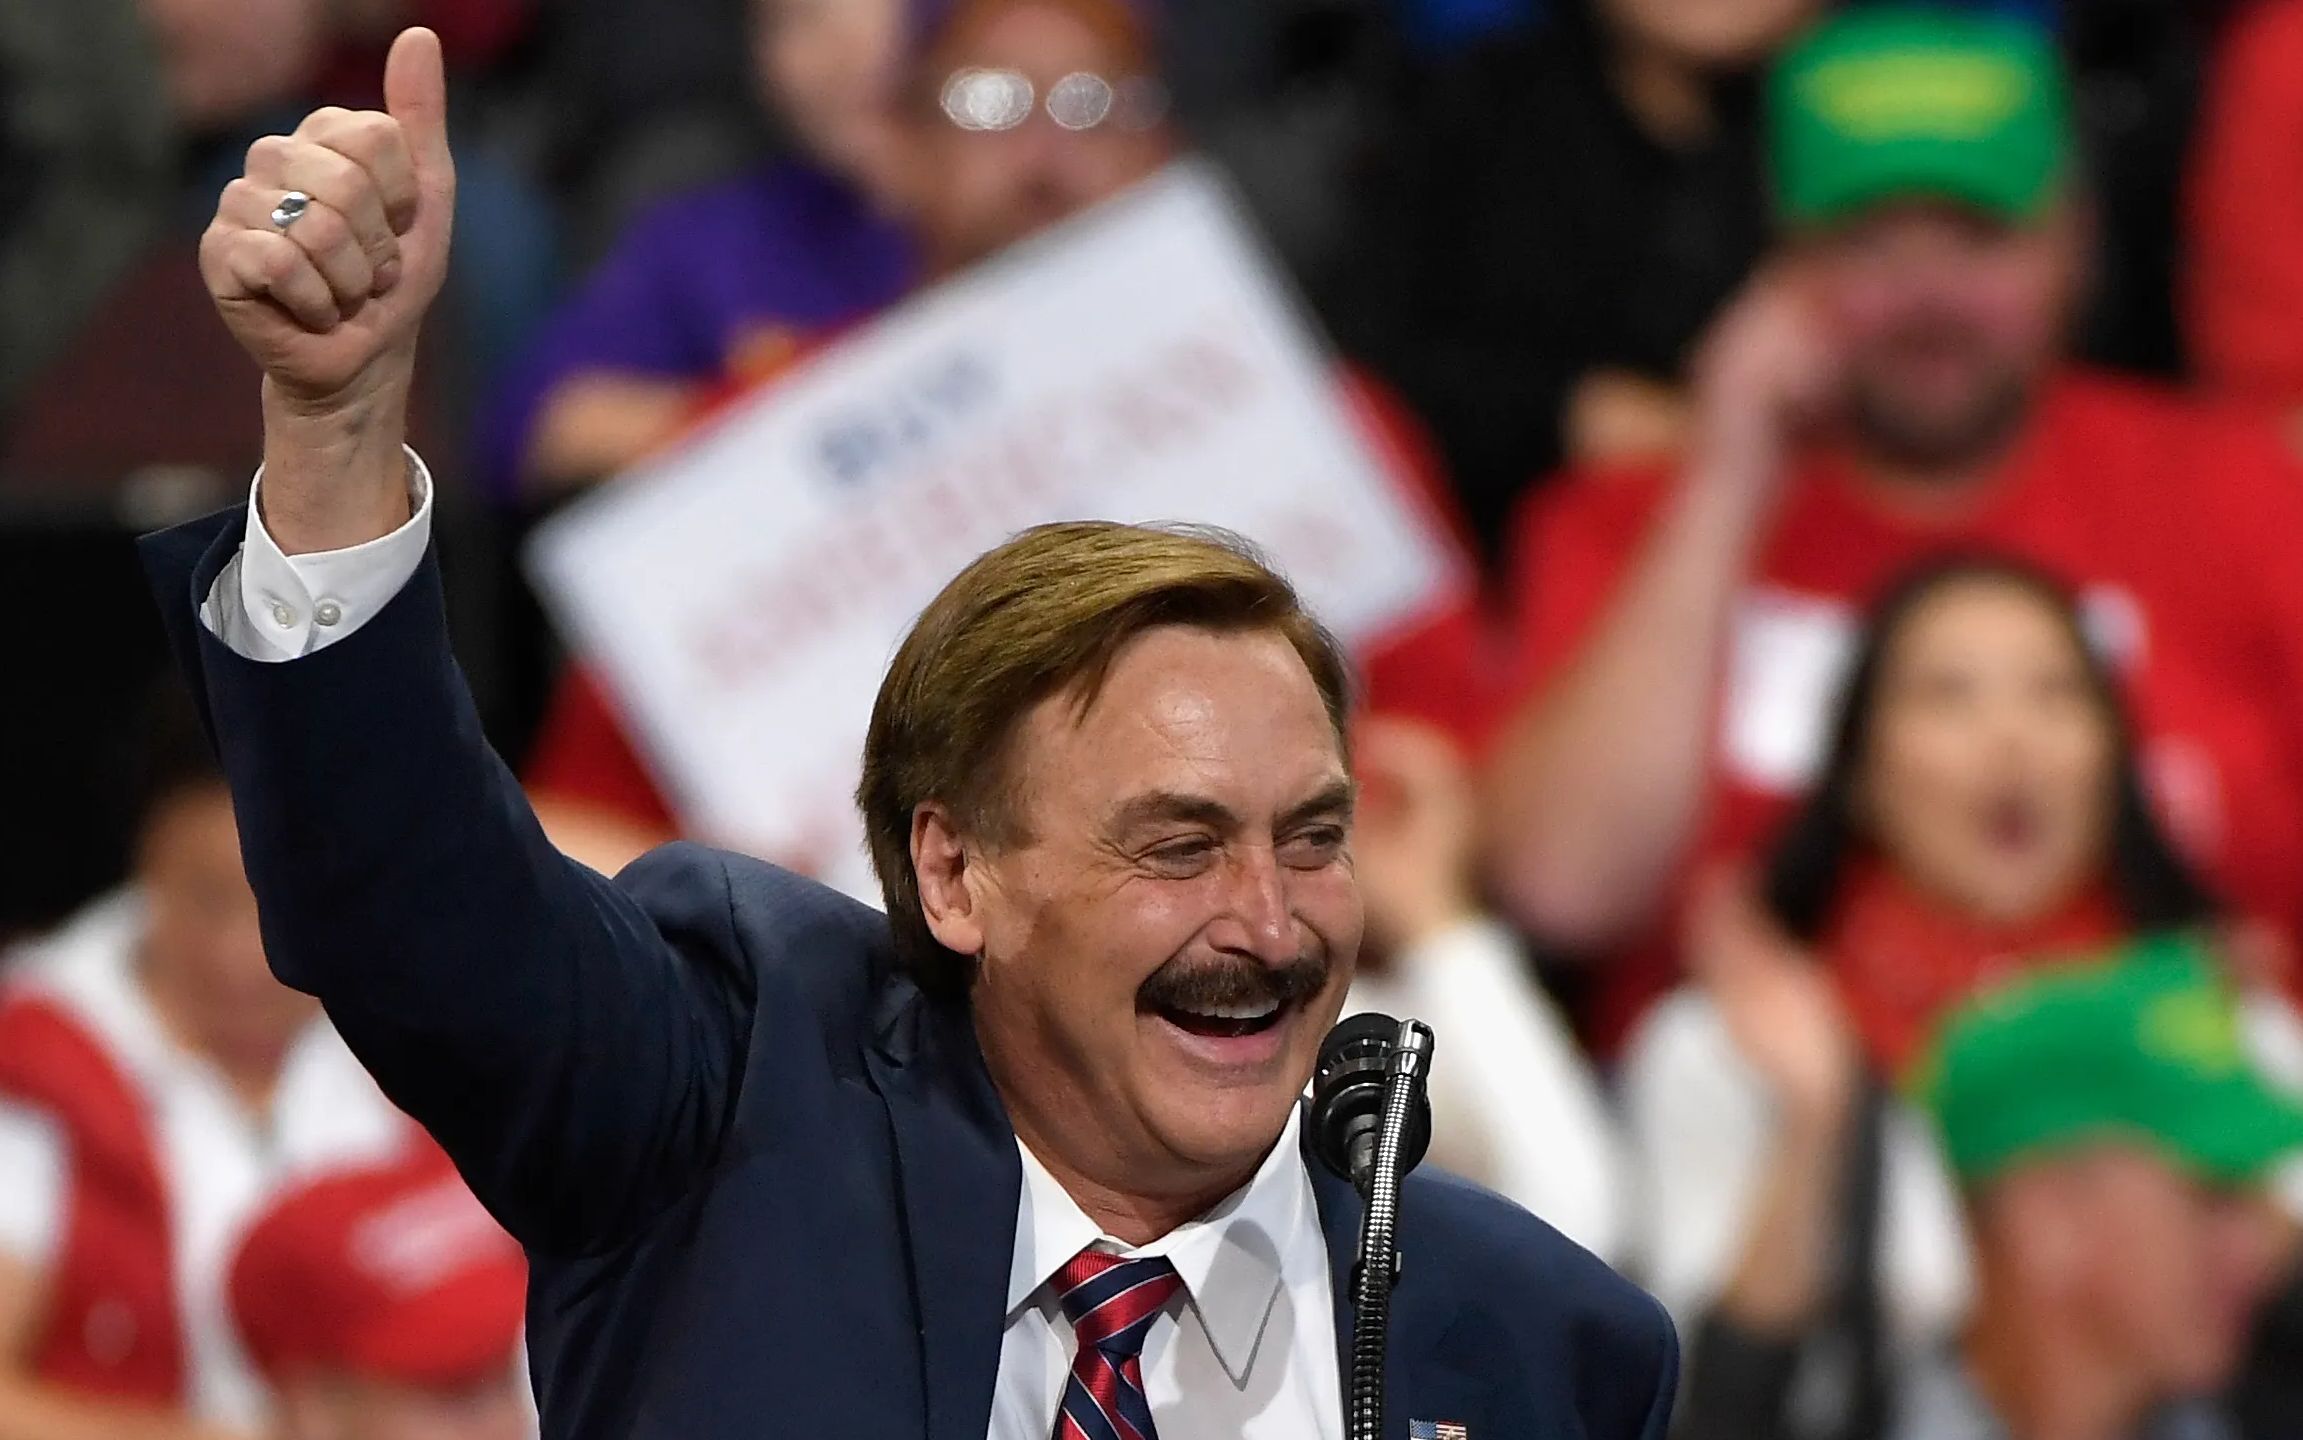 My Pillow CEO Mike Lindell speaks at a rally.